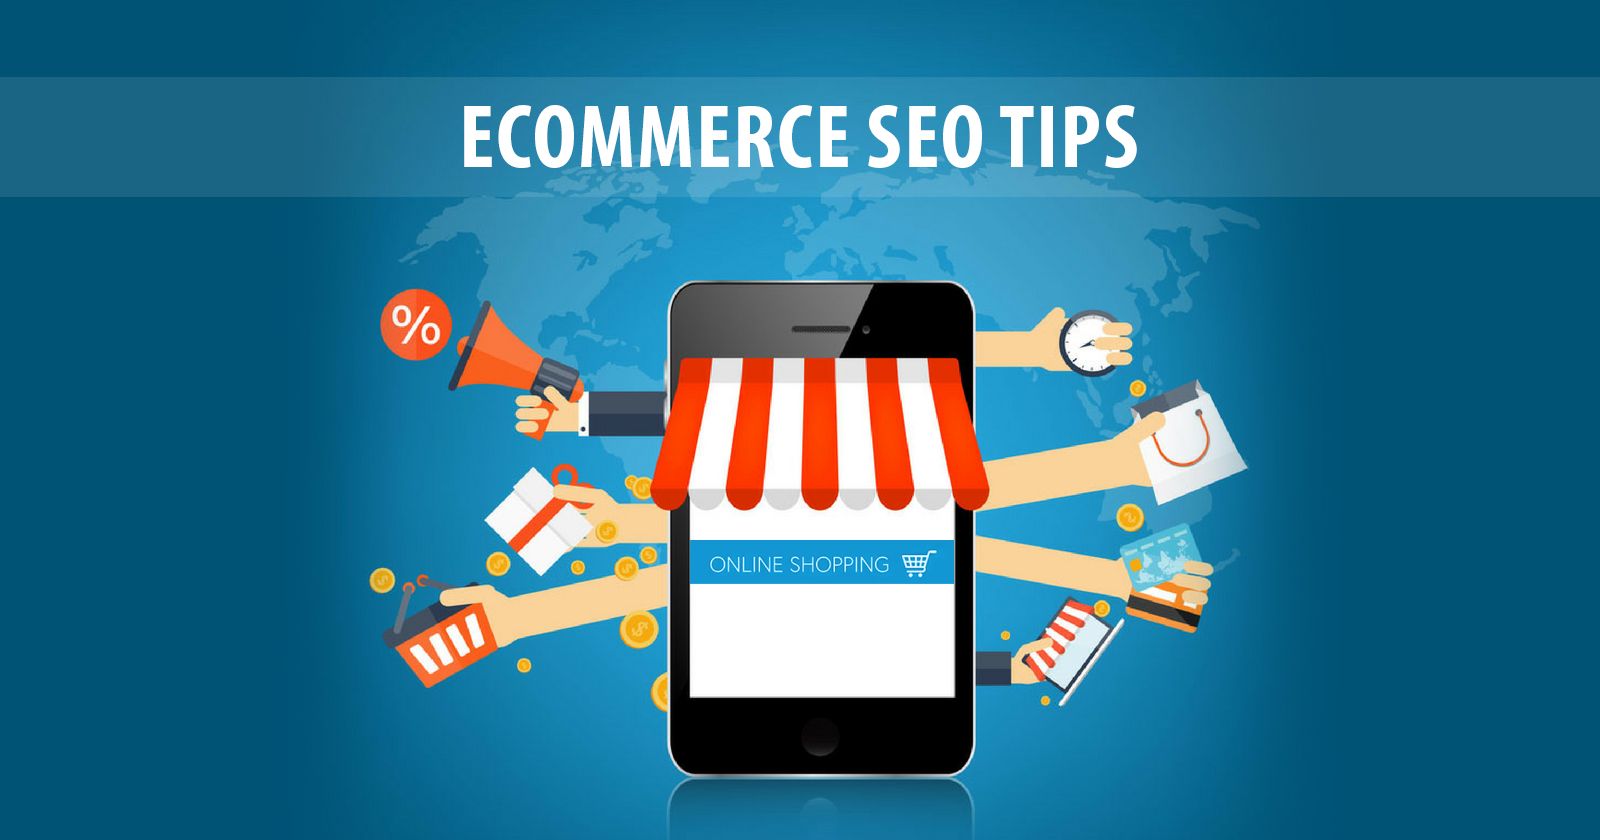 ECommerce SEO Tips to Increase Your Website Traffic Organically